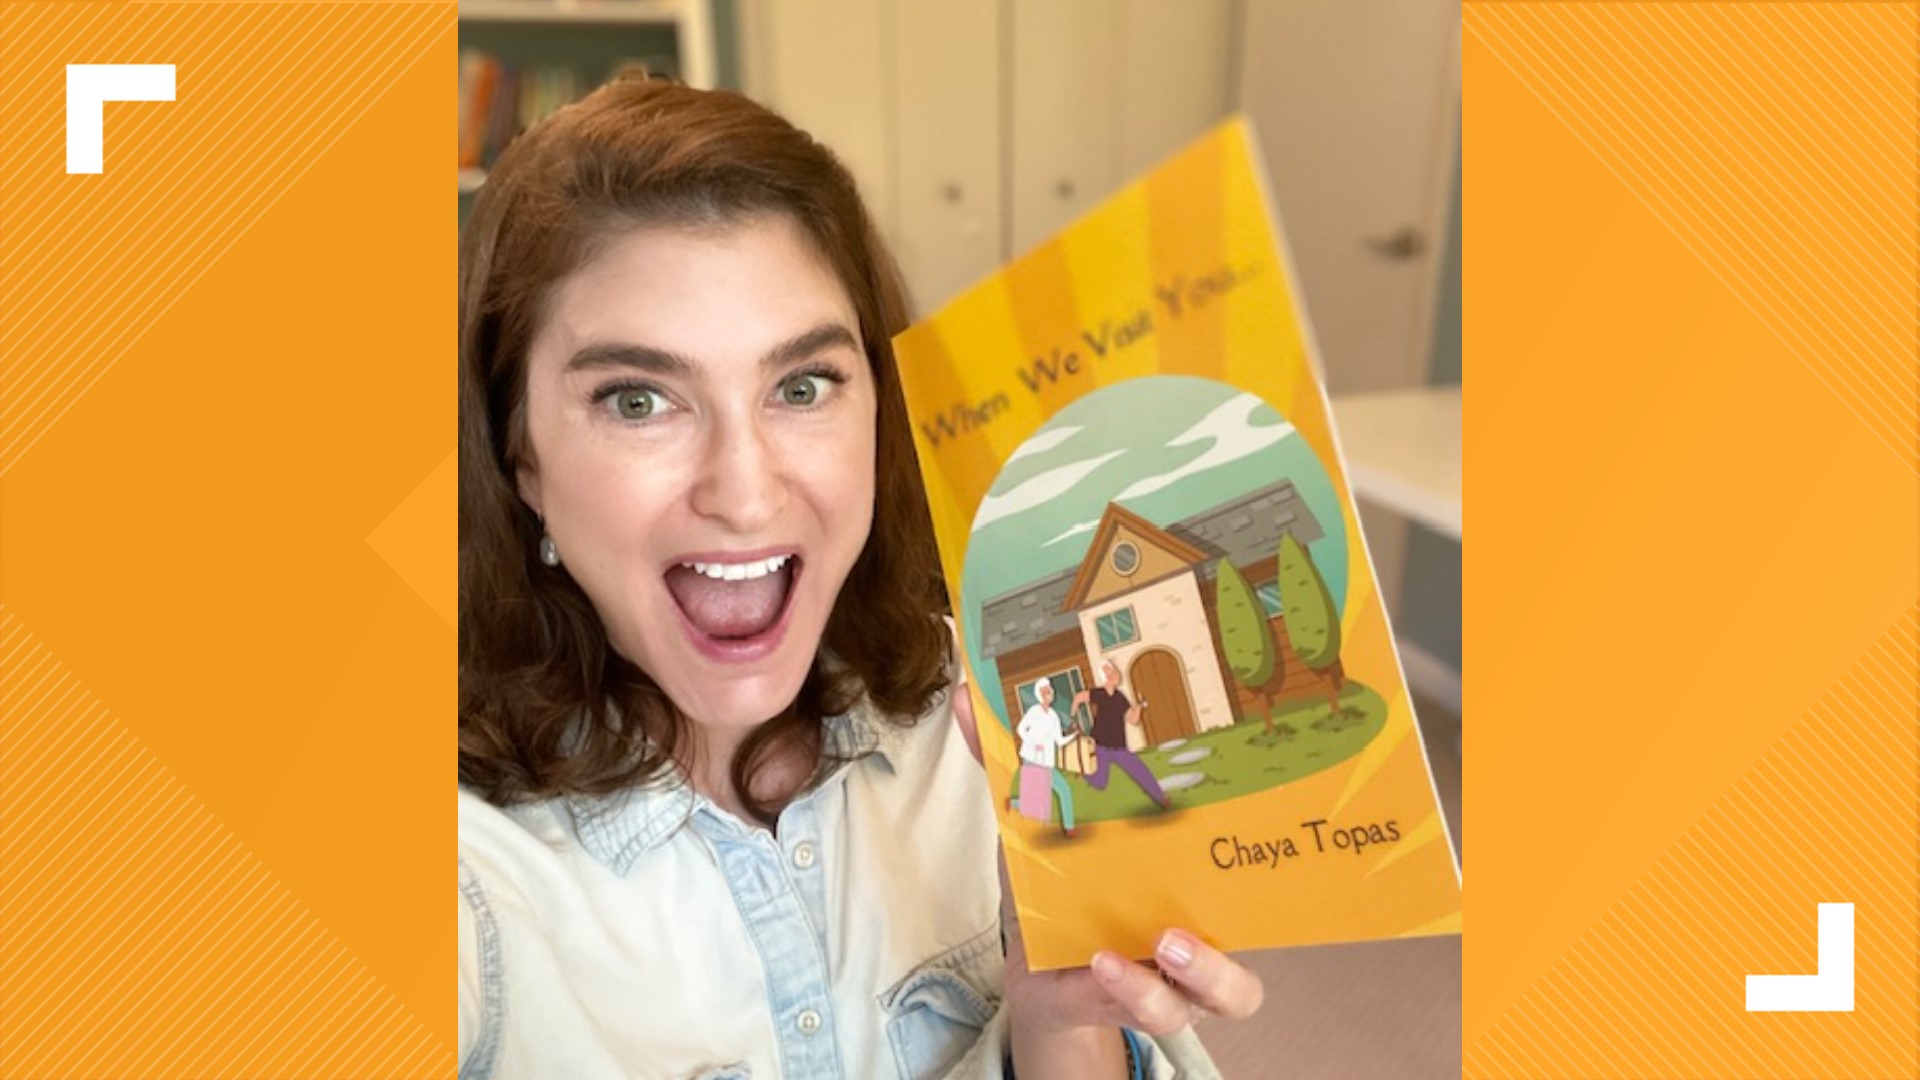 Local author Chaya Topas has written the perfect book for you and your little ones.